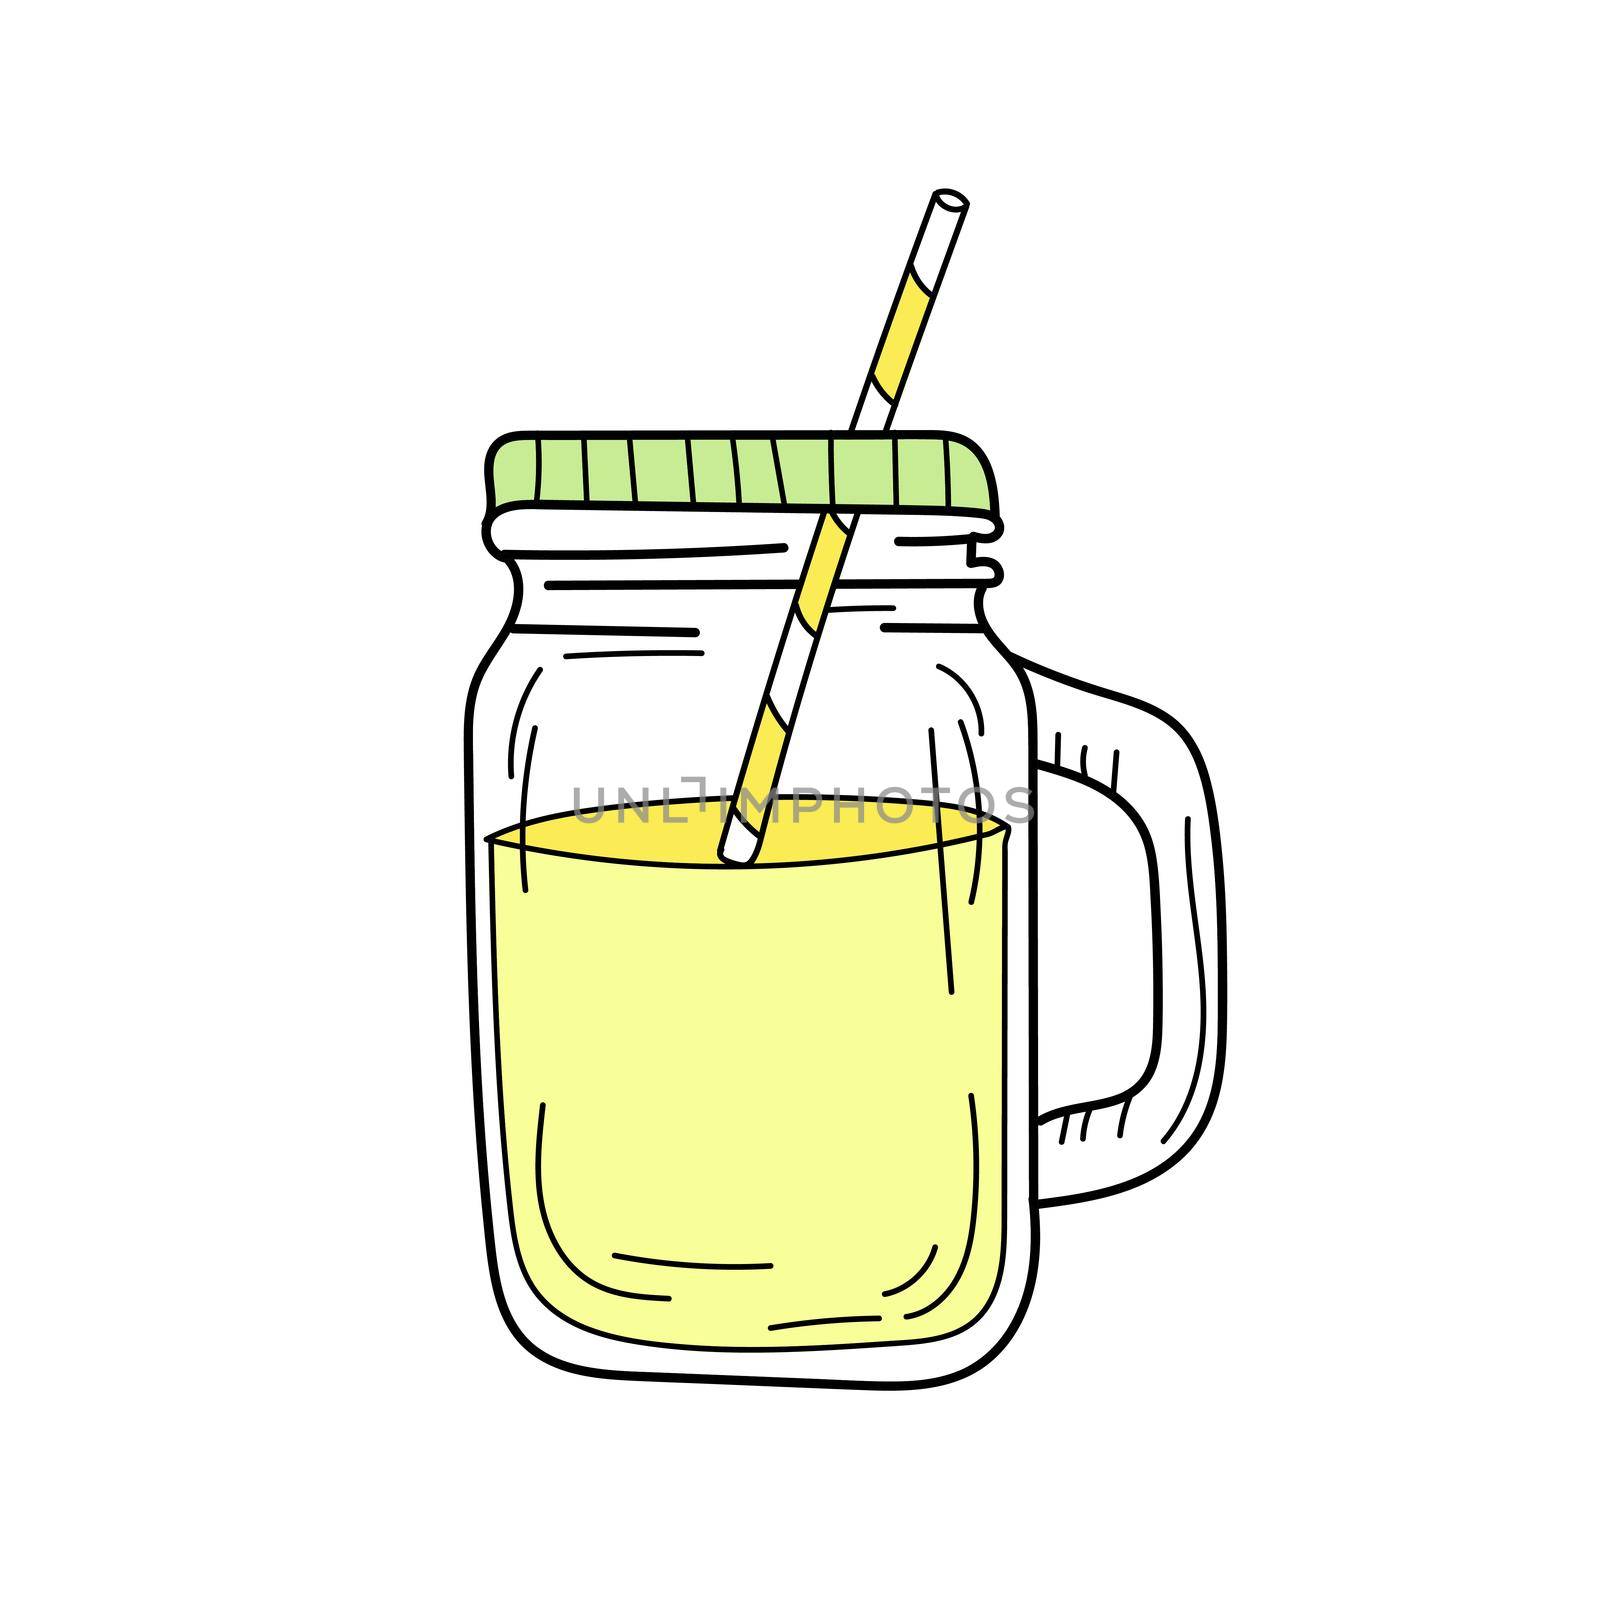 Yellow lemonade in glass jar. Fresh summer drink. Isolated hand drawn image on white background. Detox and healthy life.